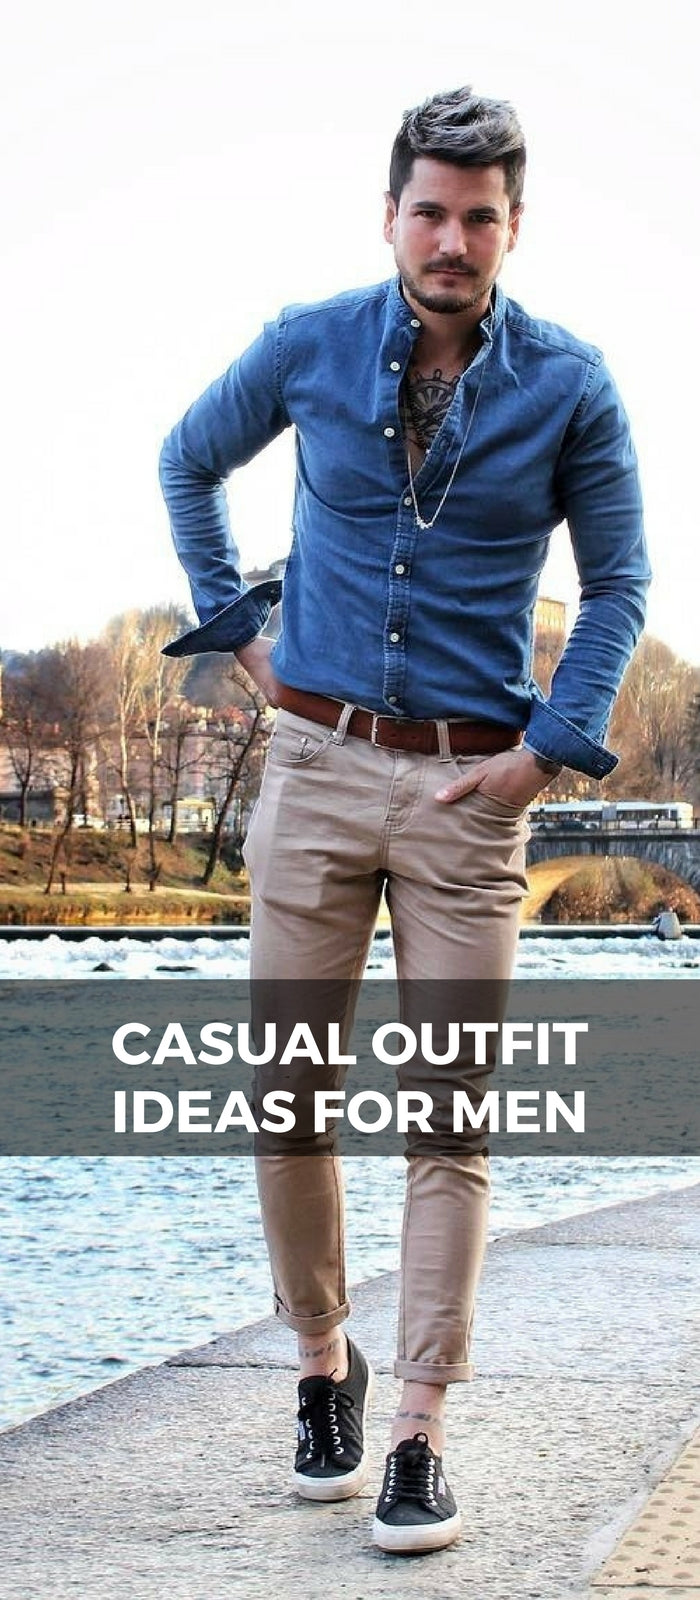 Casual Outfit Ideas For Men